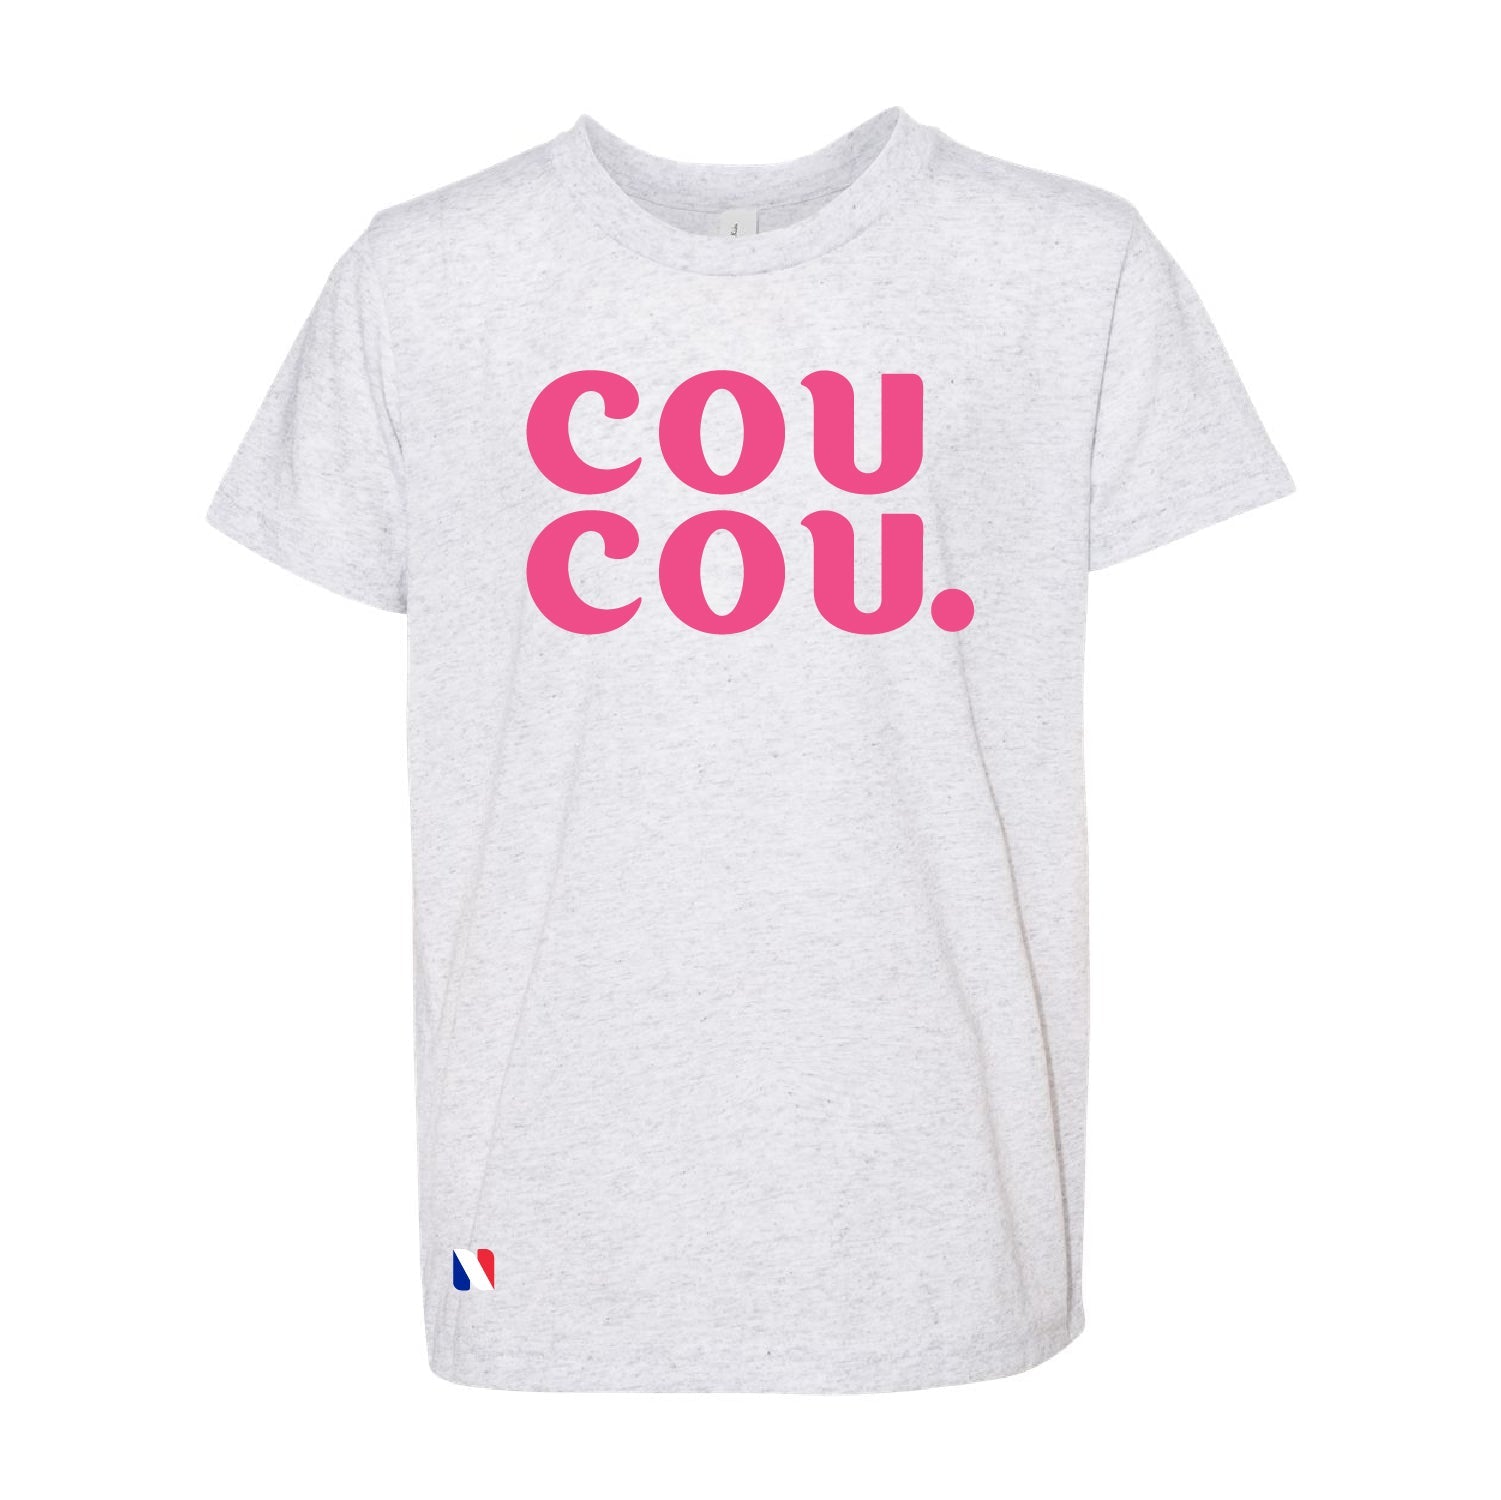 COUCOU - YOUTH TRIBLEND TEE - DSP On Demand